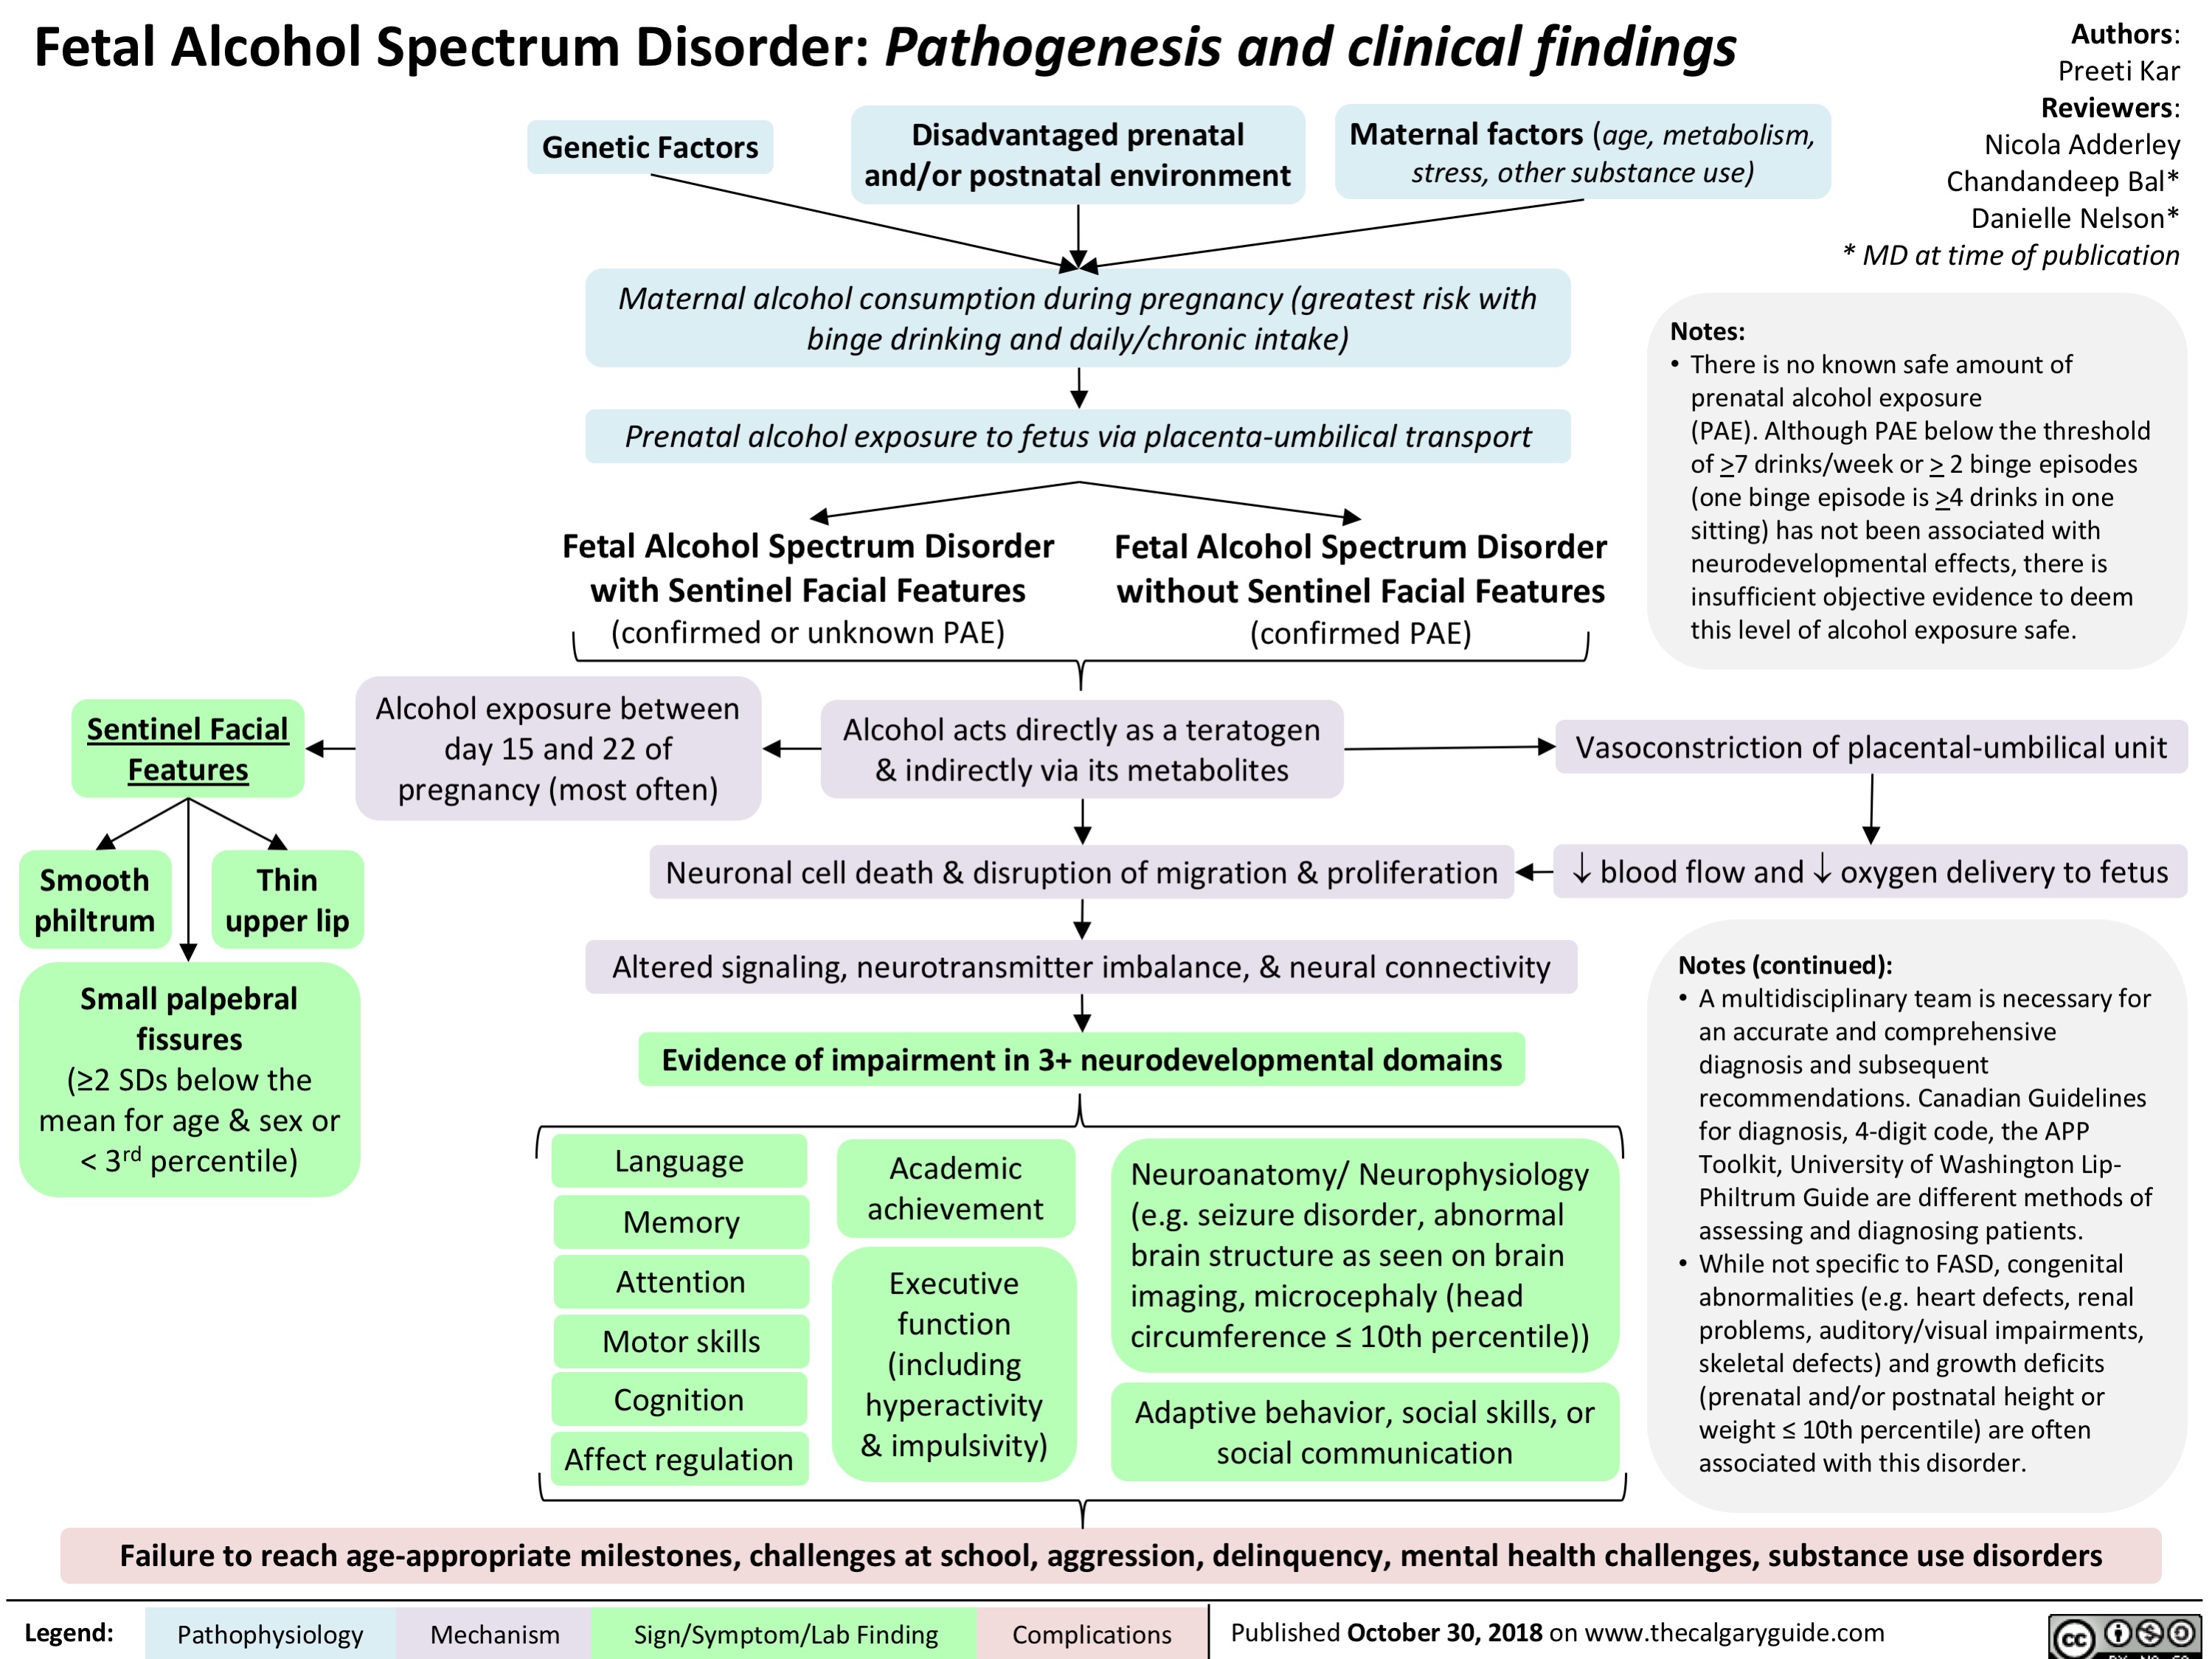 Fetal Alcohol Spectrum Disorder: Pathogenesis and clinical findings
Authors: Preeti Kar Reviewers: Nicola Adderley Chandandeep Bal* Danielle Nelson* * MD at time of publication
   Genetic Factors
Disadvantaged prenatal and/or postnatal environment
Maternal factors (age, metabolism, stress, other substance use)
  Maternal alcohol consumption during pregnancy (greatest risk with binge drinking and daily/chronic intake)
Prenatal alcohol exposure to fetus via placenta-umbilical transport
Notes:
       Fetal Alcohol Spectrum Disorder with Sentinel Facial Features (confirmed or unknown PAE)
Fetal Alcohol Spectrum Disorder without Sentinel Facial Features
• There is no known safe amount of prenatal alcohol exposure
(PAE). Although PAE below the threshold of >7 drinks/week or > 2 binge episodes (one binge episode is >4 drinks in one sitting) has not been associated with neurodevelopmental effects, there is insufficient objective evidence to deem this level of alcohol exposure safe.
    Sentinel Facial Features
(confirmed PAE) Alcohol exposure between Alcohol acts directly as a teratogen
Vasoconstriction of placental-umbilical unit  ̄ blood flow and  ̄ oxygen delivery to fetus
Notes (continued):
• A multidisciplinary team is necessary for an accurate and comprehensive diagnosis and subsequent recommendations. Canadian Guidelines for diagnosis, 4-digit code, the APP Toolkit, University of Washington Lip- Philtrum Guide are different methods of assessing and diagnosing patients.
• While not specific to FASD, congenital abnormalities (e.g. heart defects, renal problems, auditory/visual impairments, skeletal defects) and growth deficits (prenatal and/or postnatal height or weight ≤ 10th percentile) are often associated with this disorder.
           Smooth philtrum
Thin upper lip
day 15 and 22 of & indirectly via its metabolites pregnancy (most often)
Neuronal cell death & disruption of migration & proliferation Altered signaling, neurotransmitter imbalance, & neural connectivity Evidence of impairment in 3+ neurodevelopmental domains
     Small palpebral fissures
(≥2 SDs below the mean for age & sex or < 3rd percentile)
Language Memory Attention Motor skills Cognition Affect regulation
Academic achievement
Executive function (including hyperactivity & impulsivity)
Neuroanatomy/ Neurophysiology (e.g. seizure disorder, abnormal brain structure as seen on brain imaging, microcephaly (head circumference ≤ 10th percentile))
Adaptive behavior, social skills, or social communication
               Failure to reach age-appropriate milestones, challenges at school, aggression, delinquency, mental health challenges, substance use disorders
 Legend:
 Pathophysiology
Mechanism
Sign/Symptom/Lab Finding
  Complications
 Published October 30, 2018 on www.thecalgaryguide.com
   